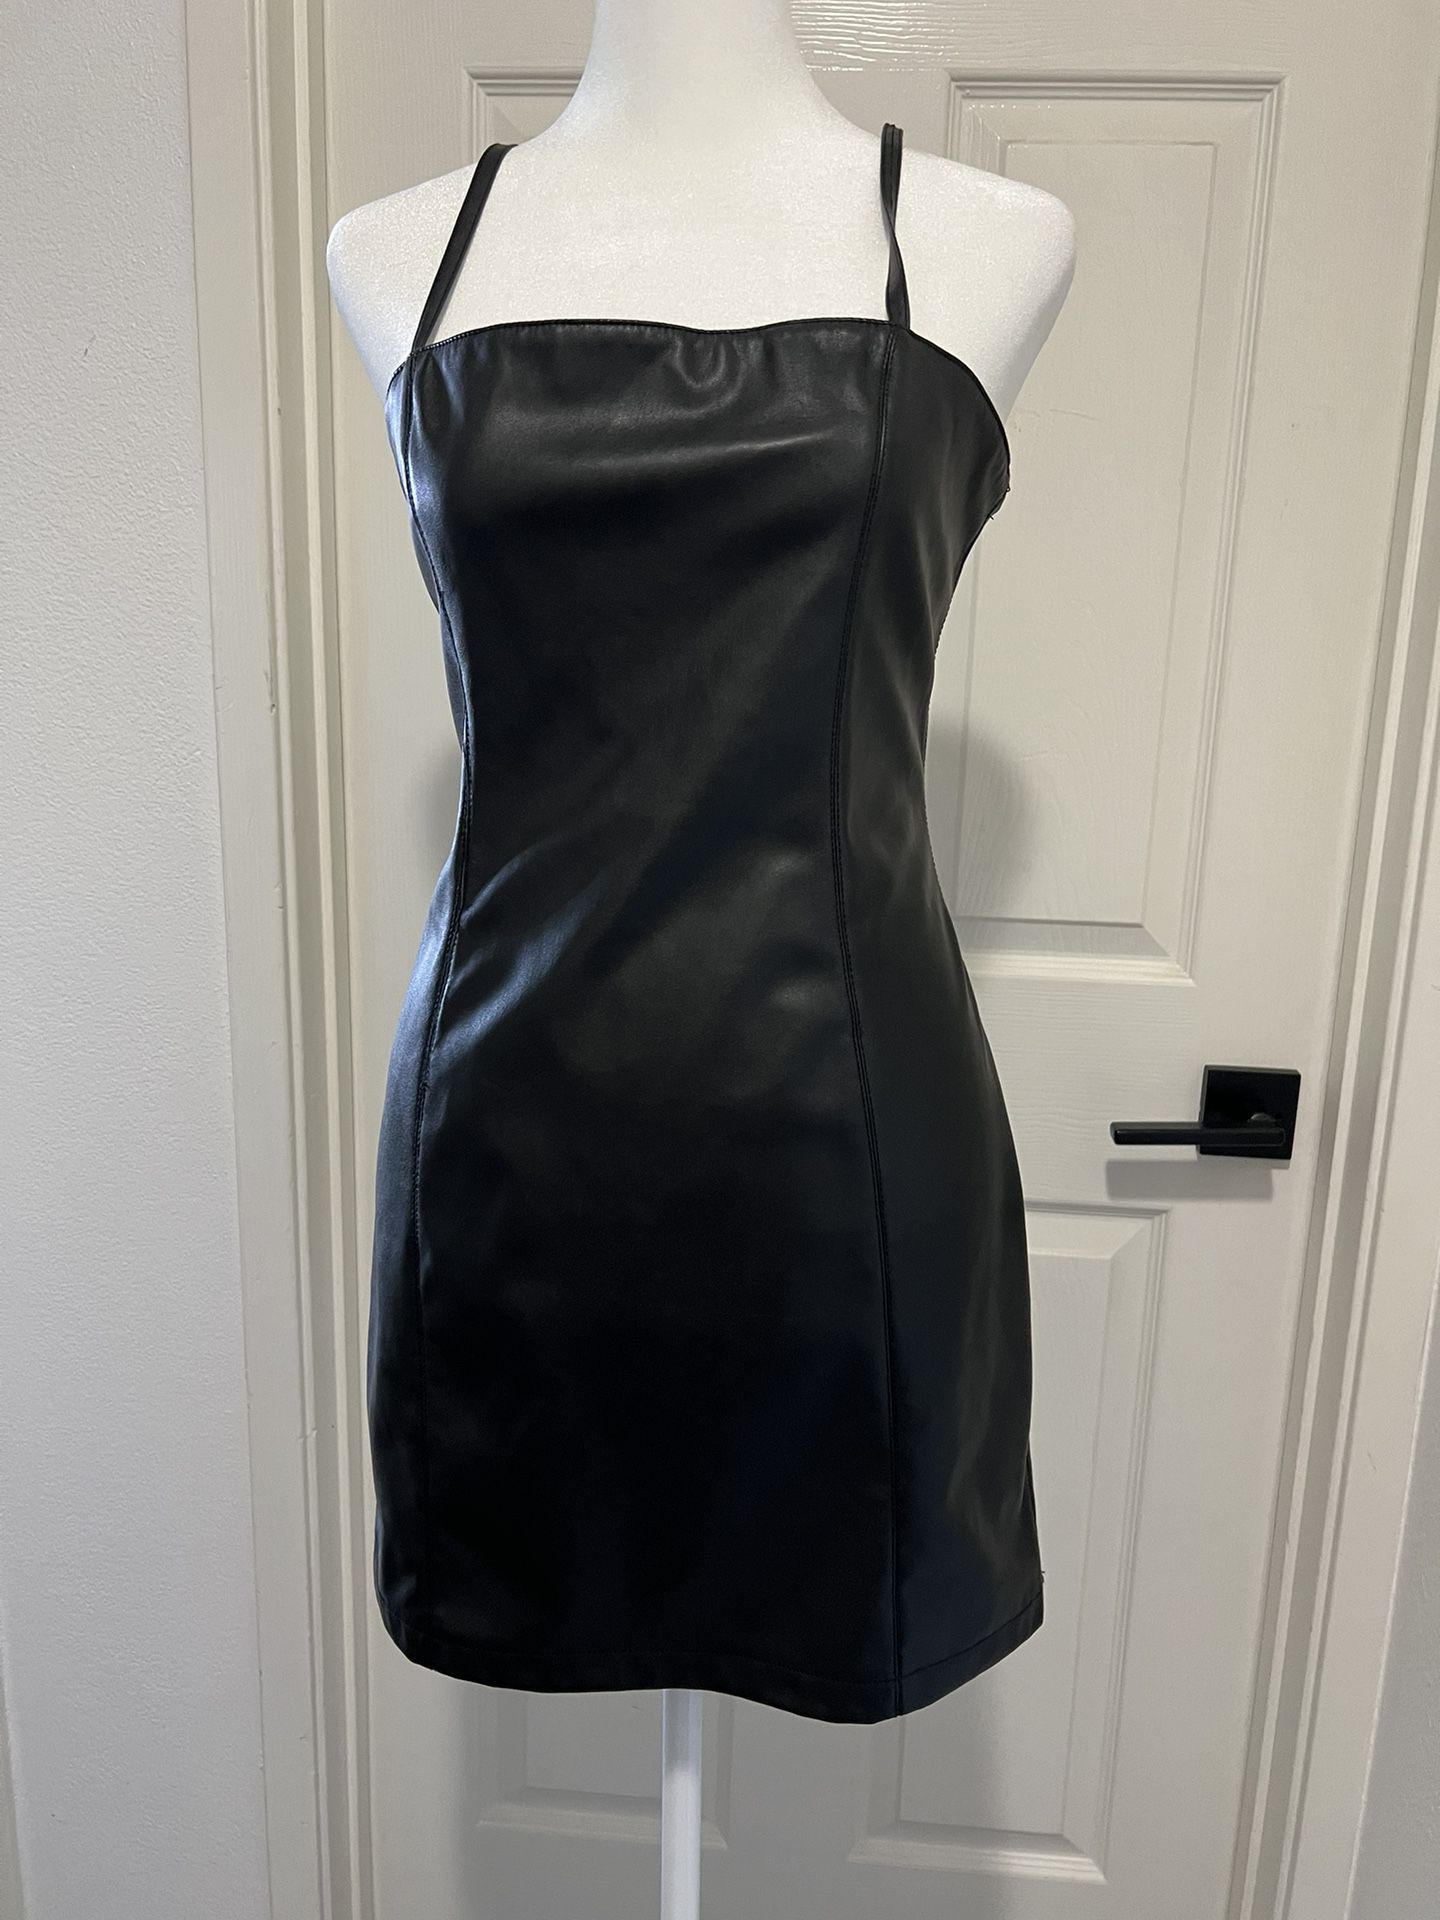 Leather Dress (Small )